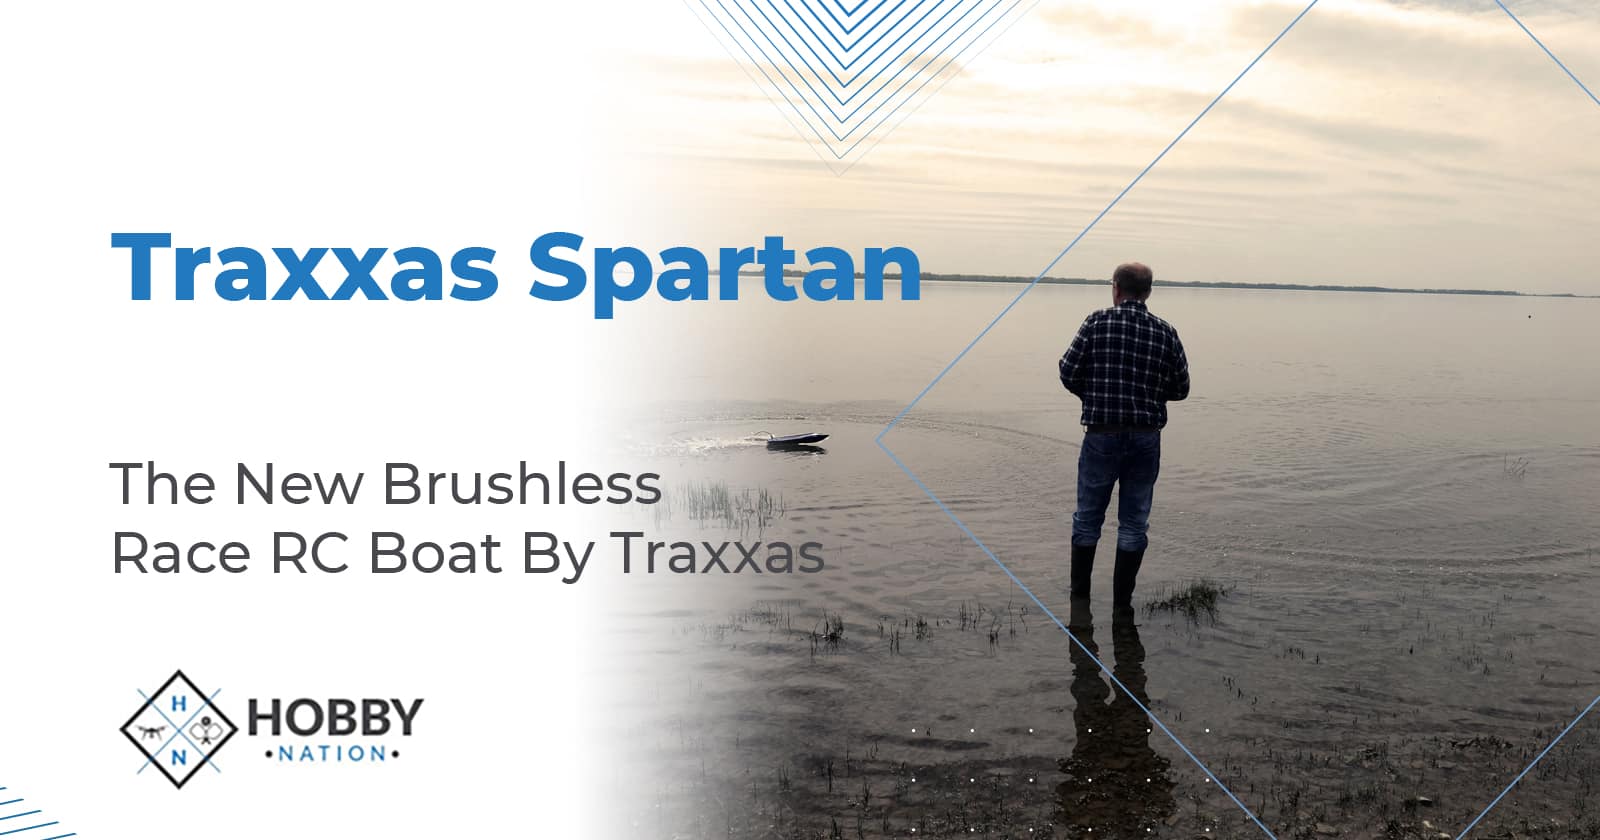 Traxxas Spartan: The New Brushless Race RC Boat by Traxxas